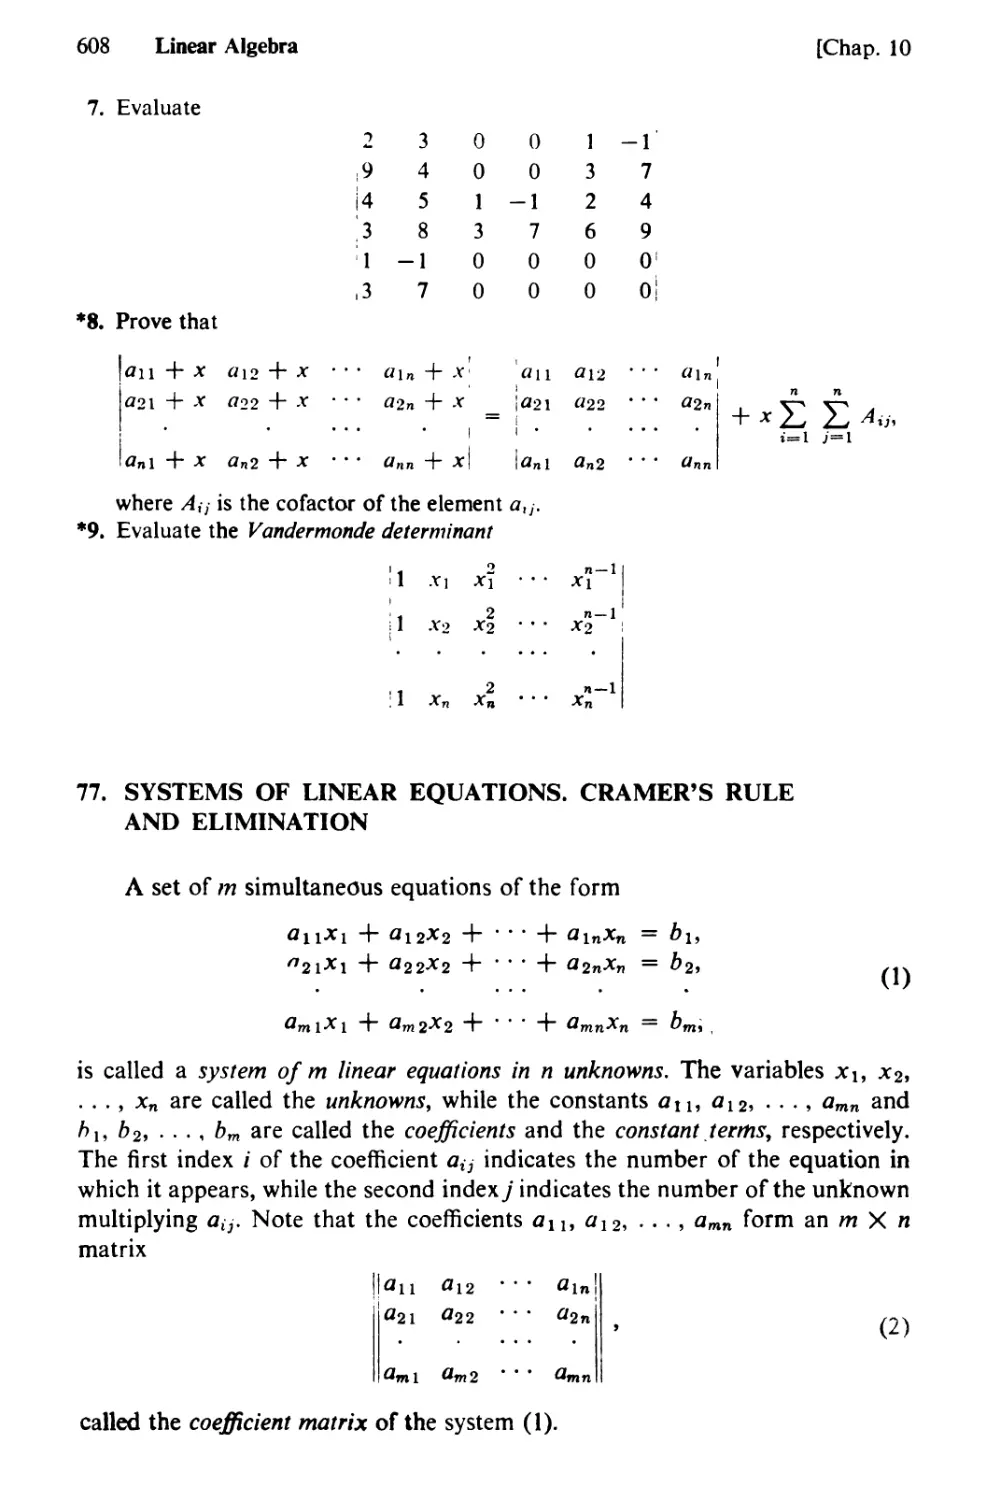 77. Systems of Linear Equations. Cramer's Rule and Elimination